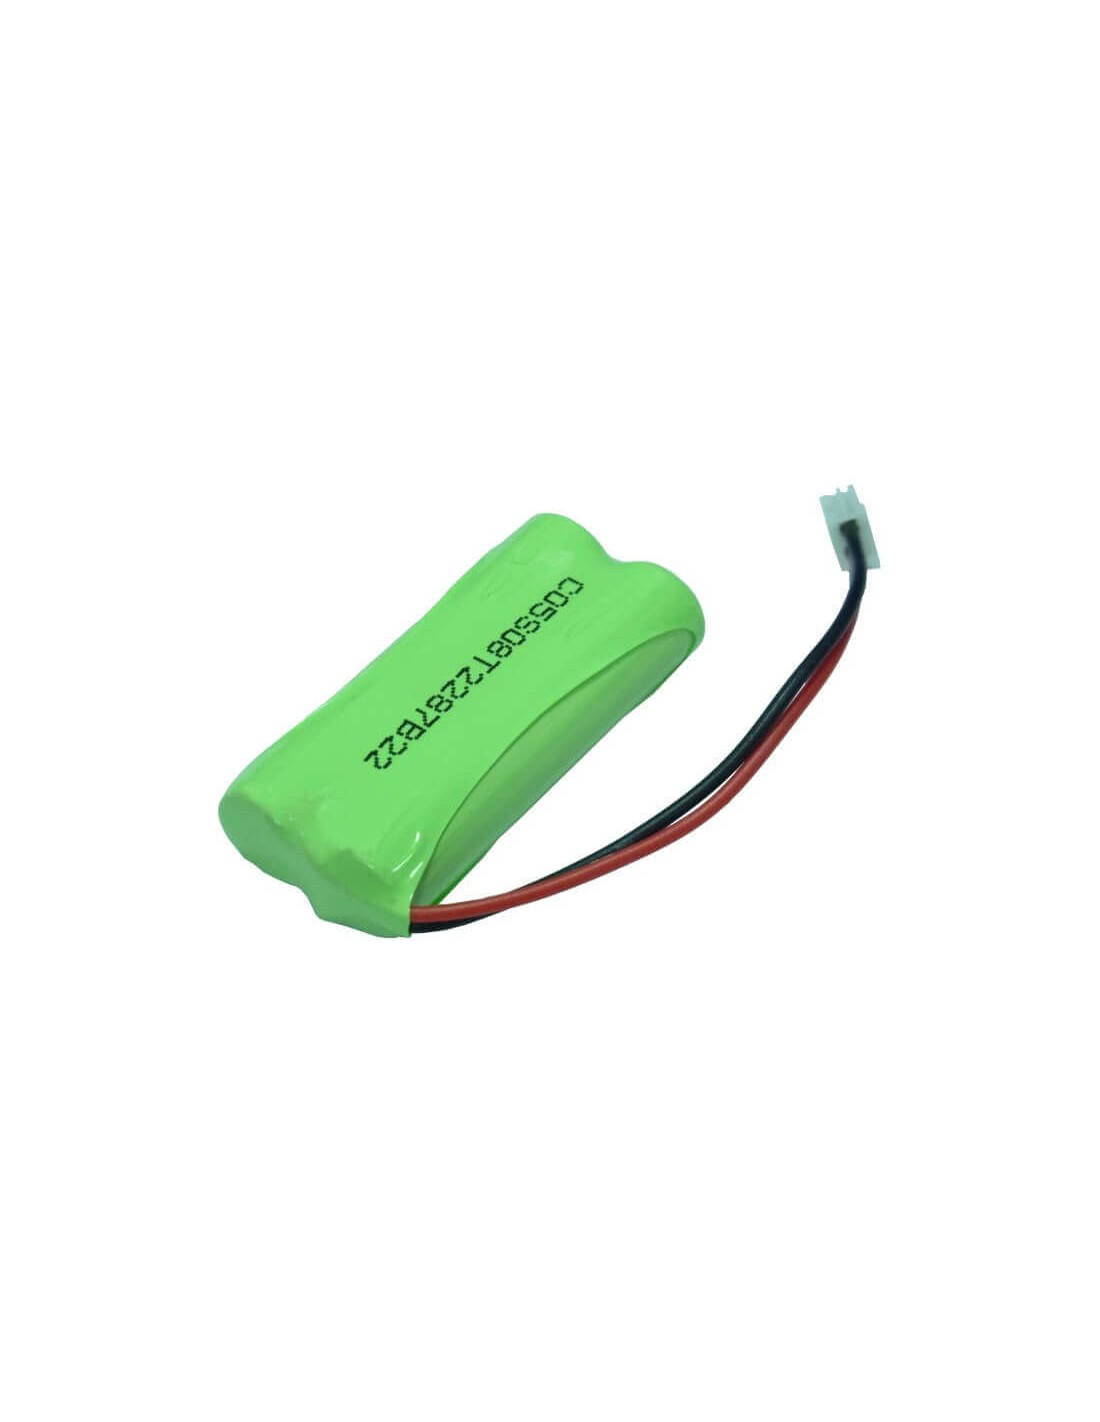 Battery for Texet, Tx-d7455a 2.4V, 650mAh - 1.56Wh